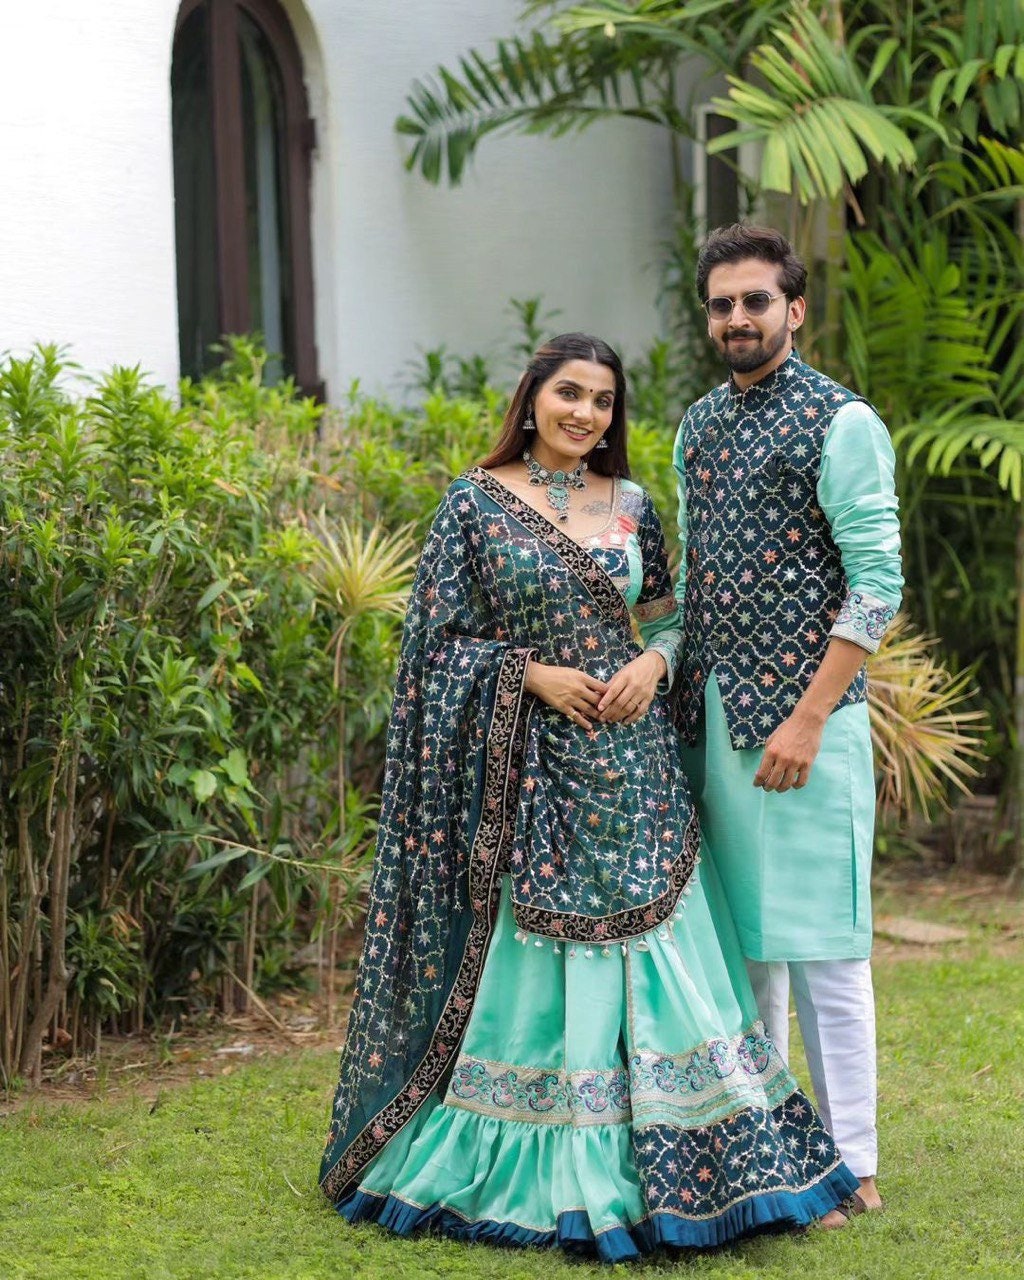 Get These Matching Couple Wedding Suit for All Your Functions and Ceremonies